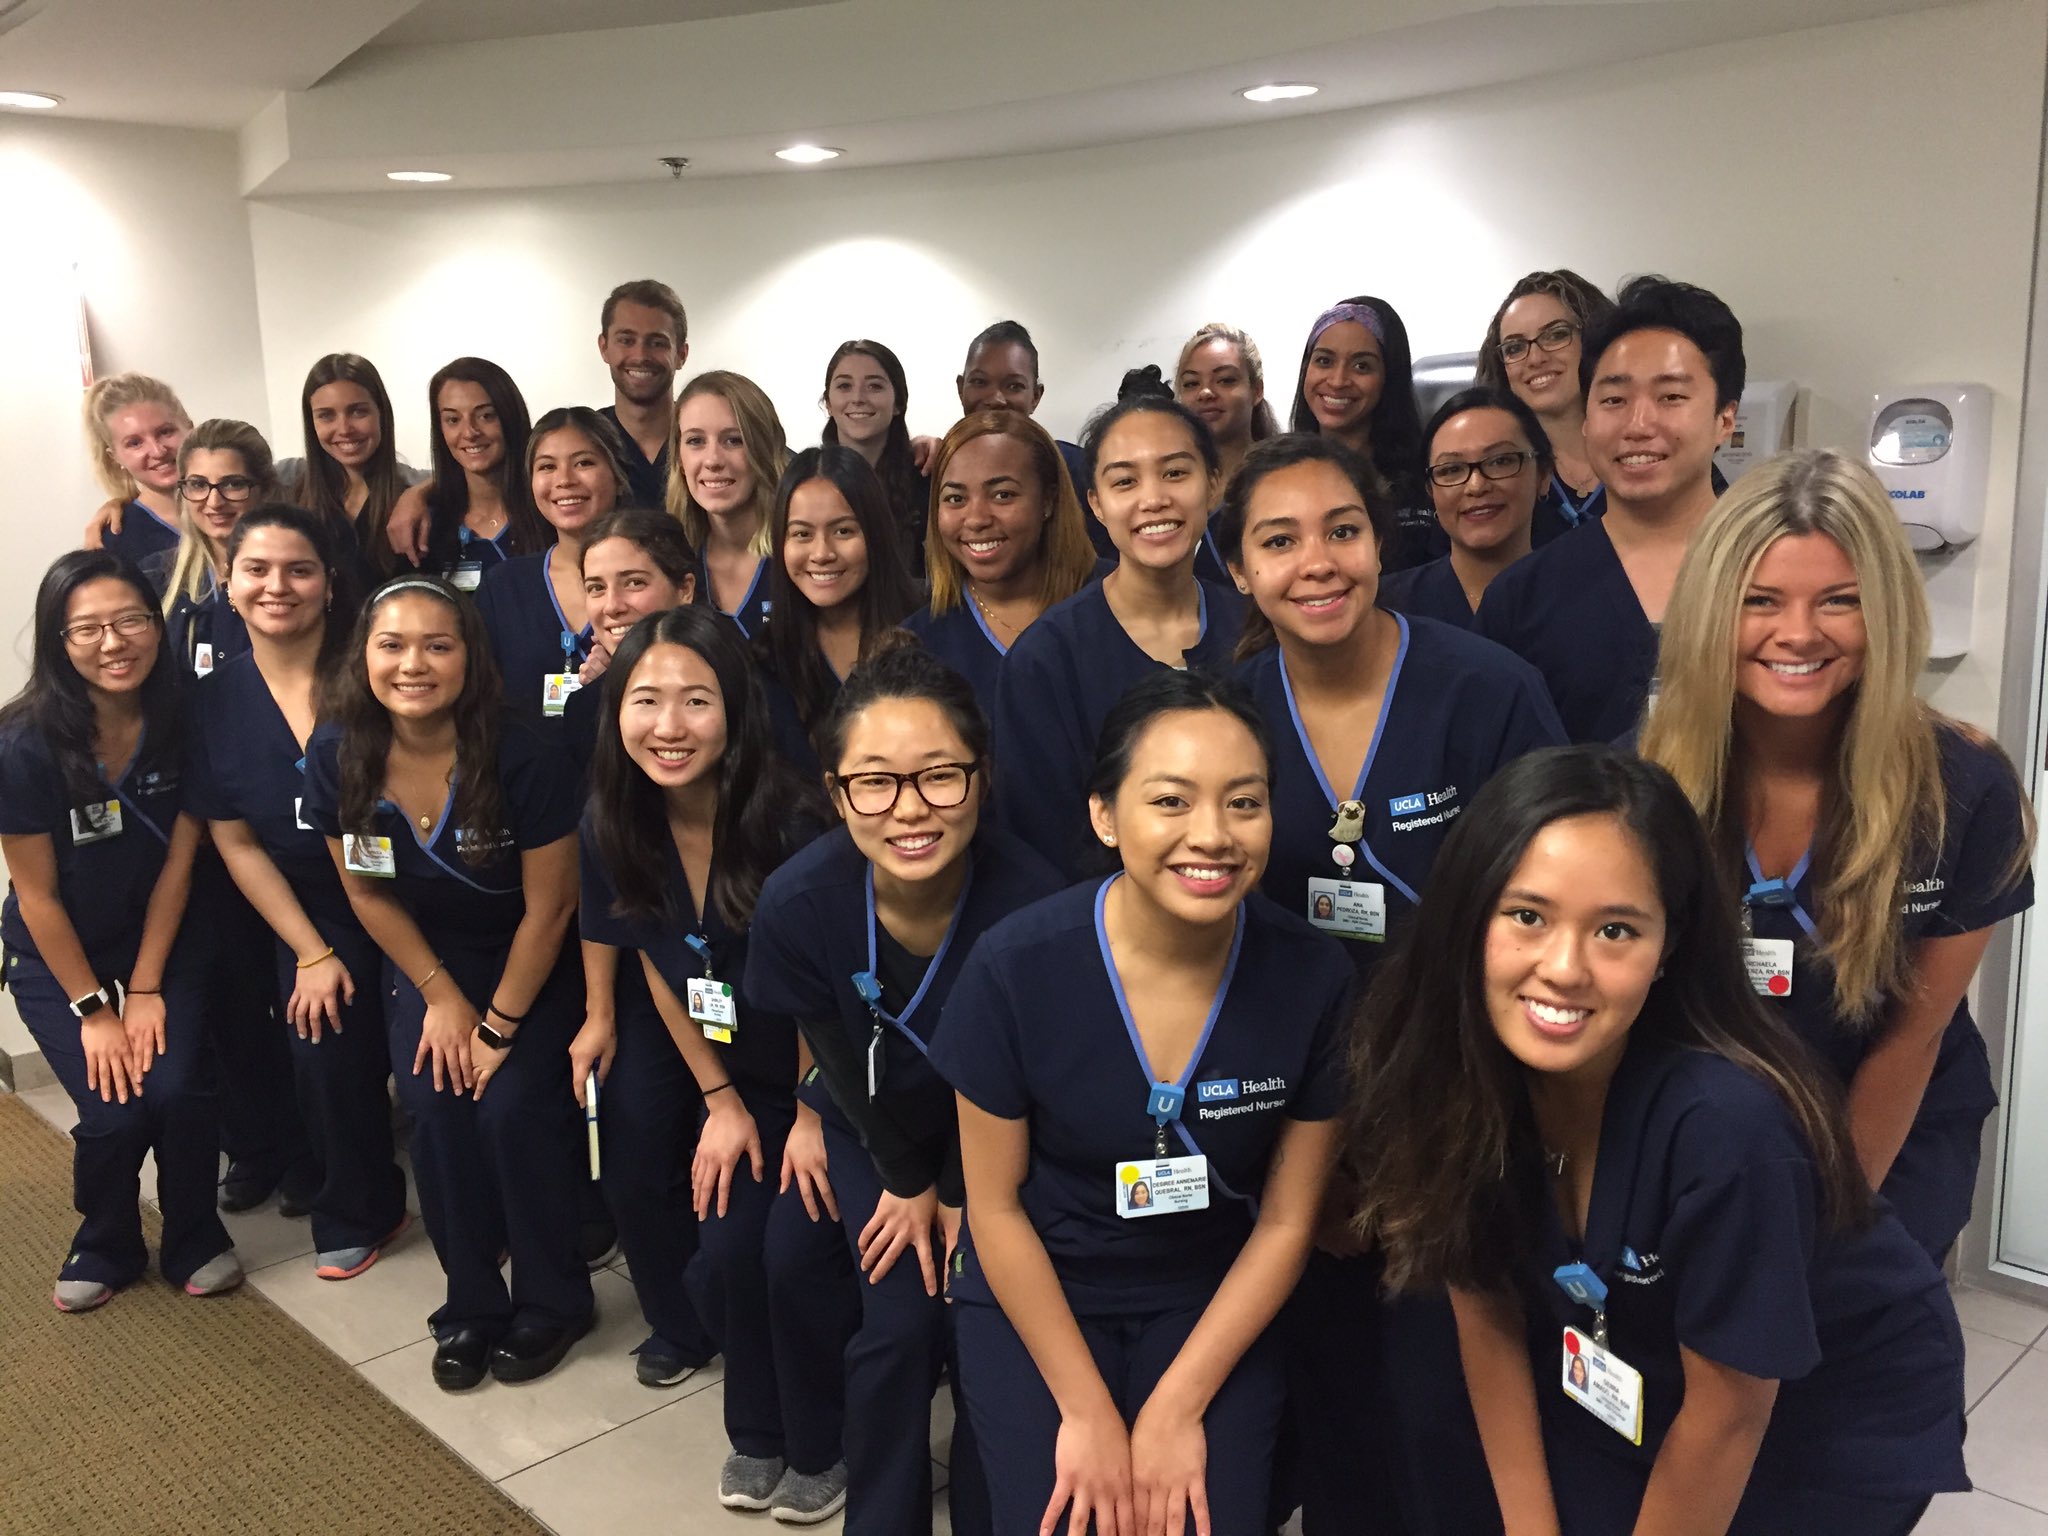 UCLA School of Nursing on Twitter: "And special congratulations to our 2017  grads starting their careers @UCLAHealth https://t.co/Lc48bimLoj" / Twitter